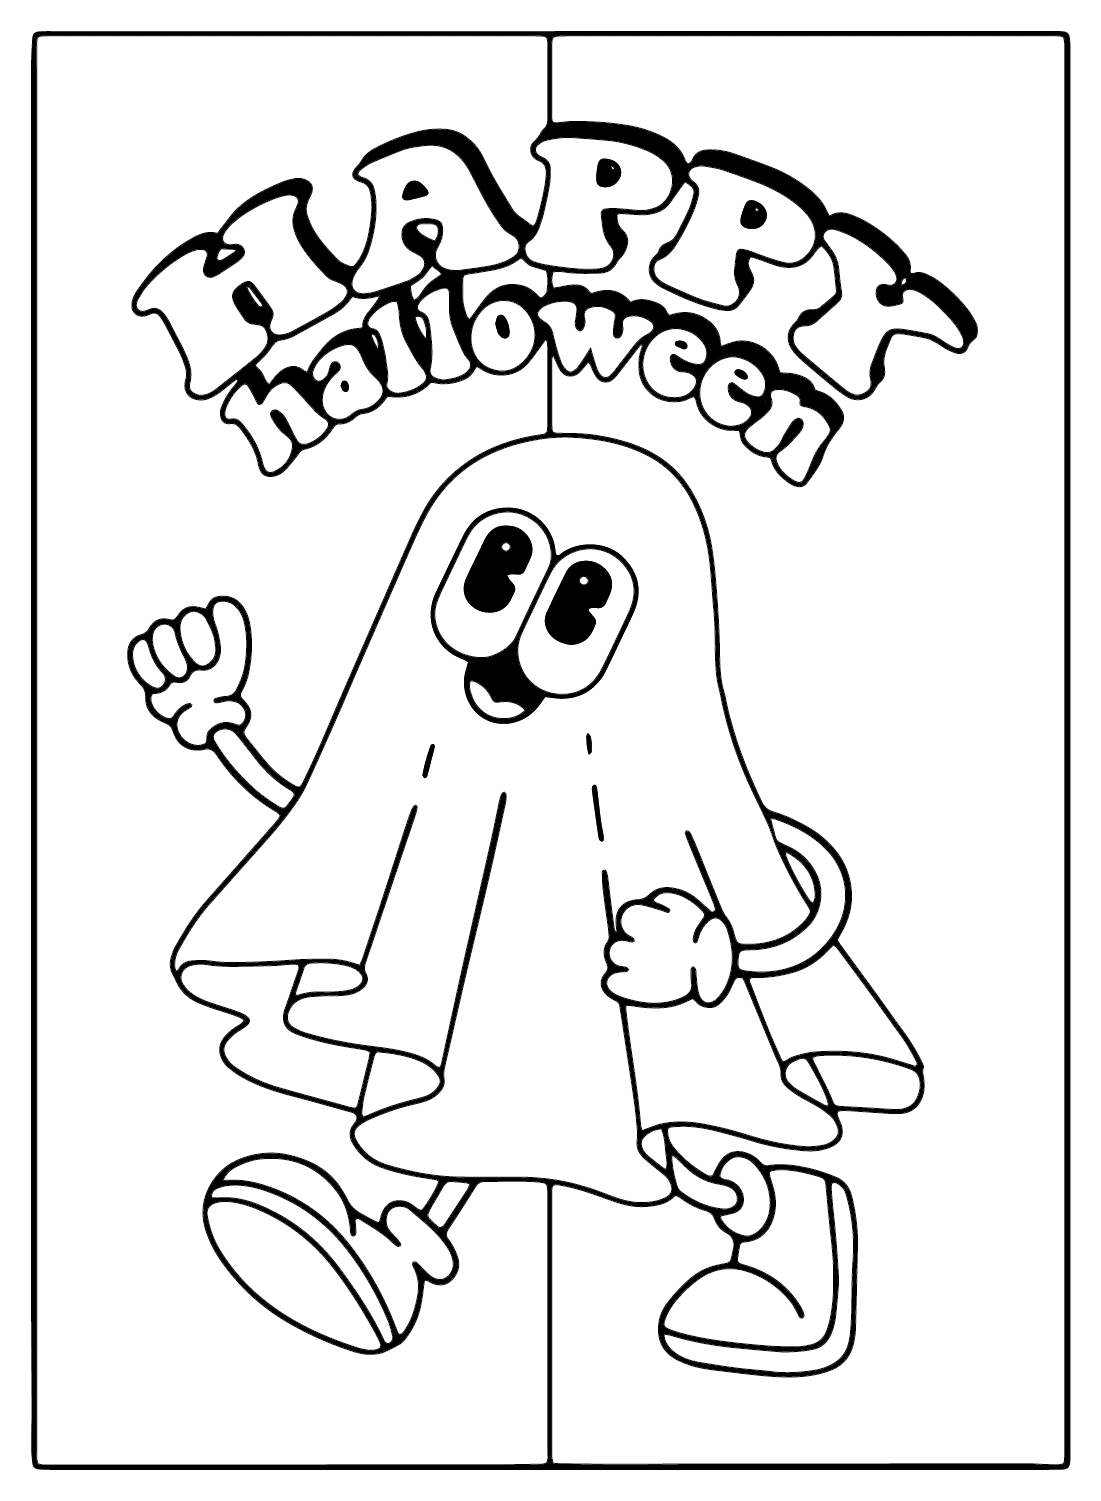 Free Printable Halloween Cards Coloring Page from Halloween Cards